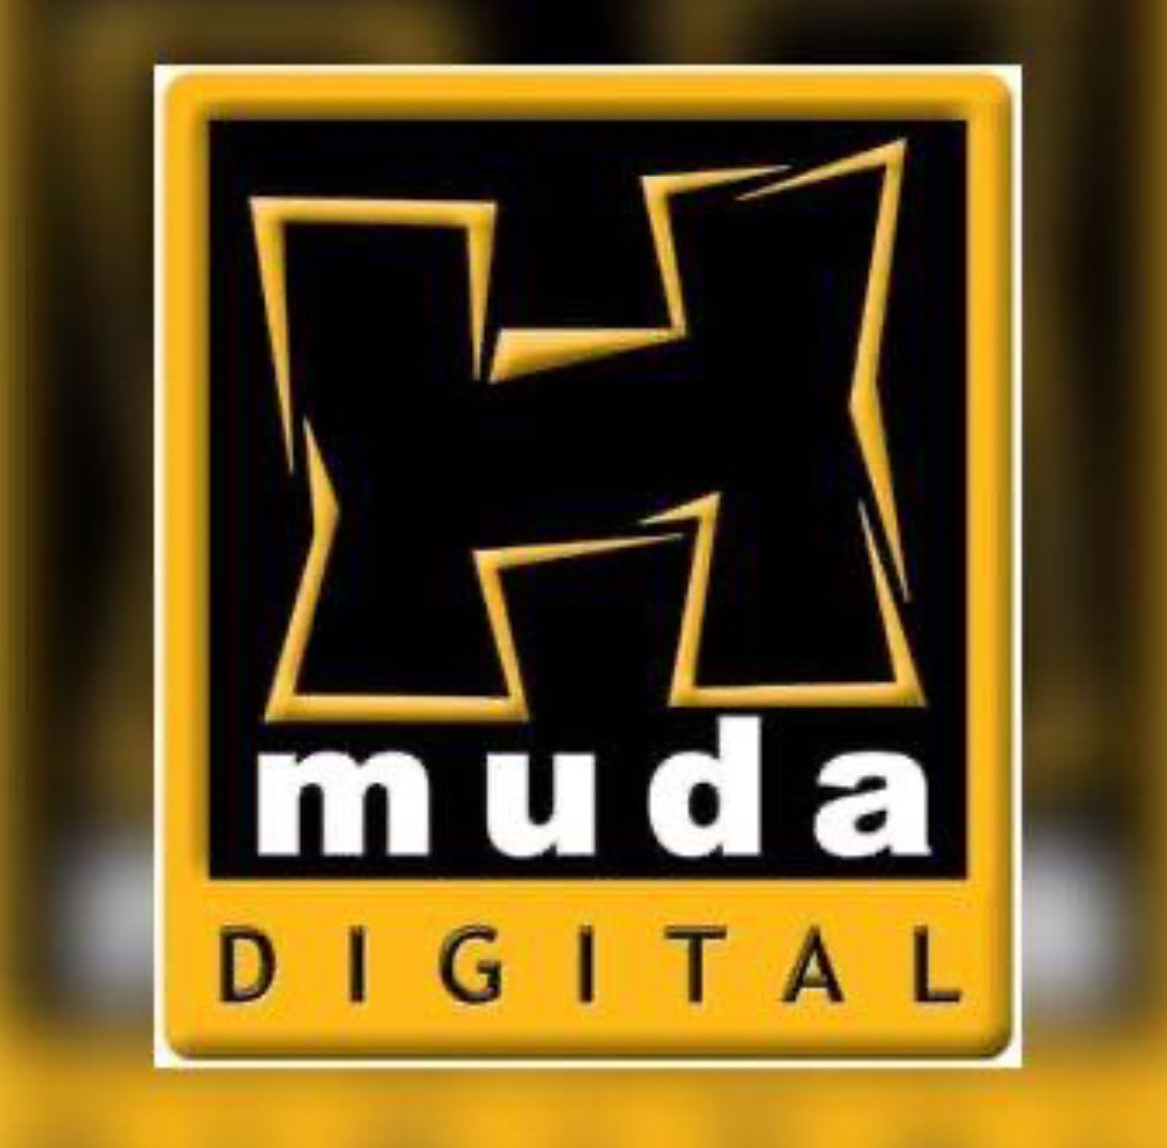 This site is managed by H-muda Digital.